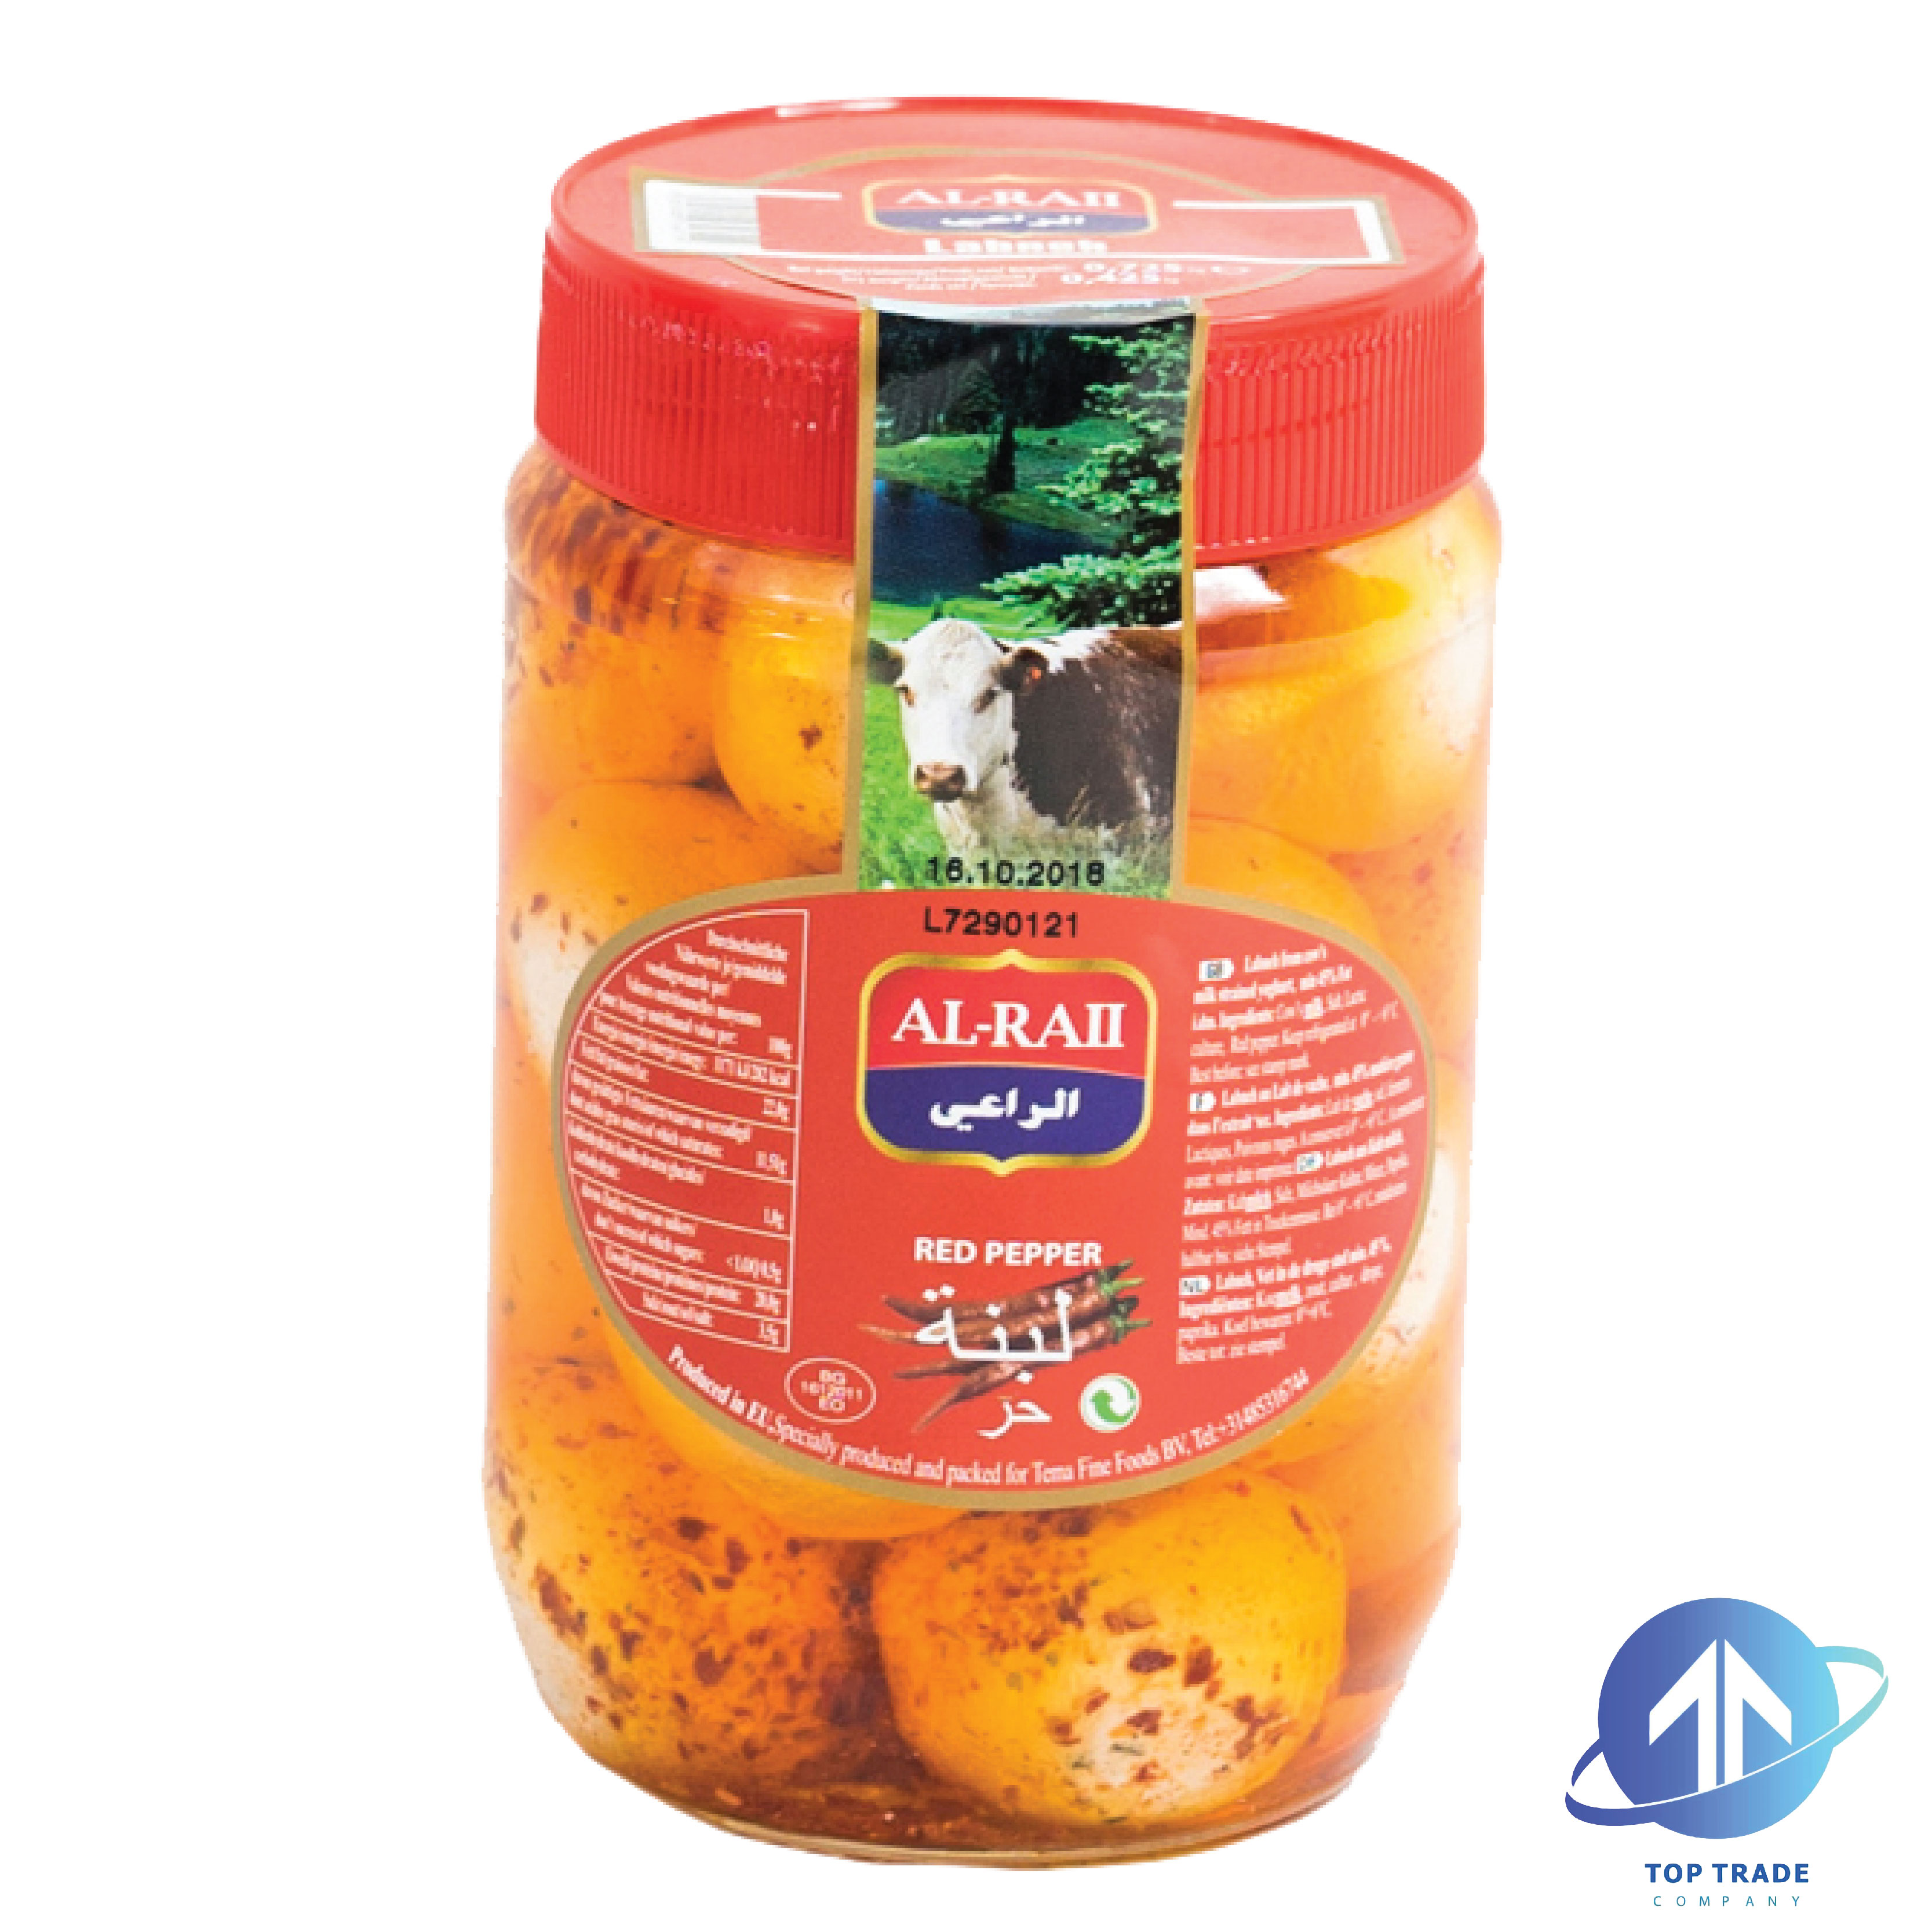 Al-Raii Labneh With Red Pepper Glass 425gr